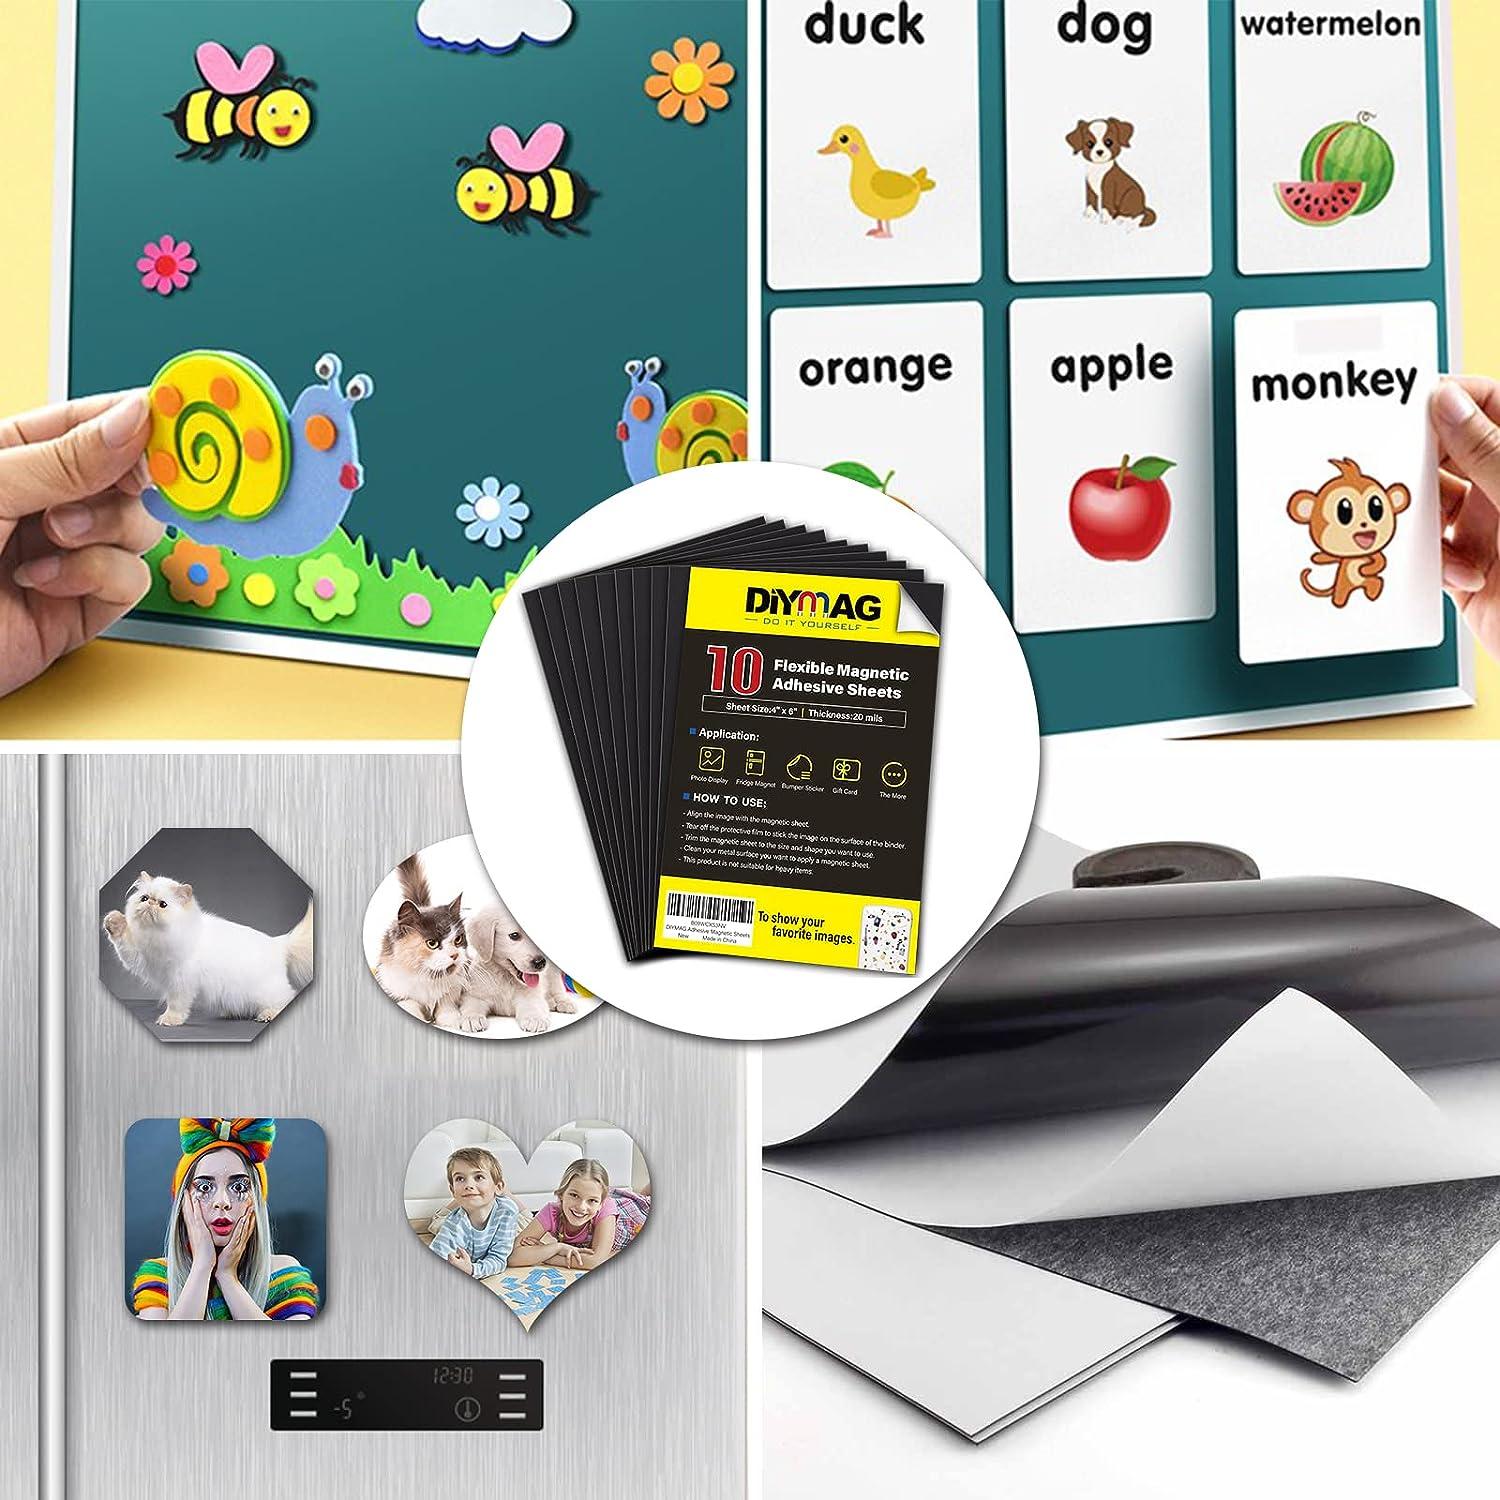 Flexible A4 Magnetic Sheet Sticker, Non-Stick/Self-Adhesive,Thick